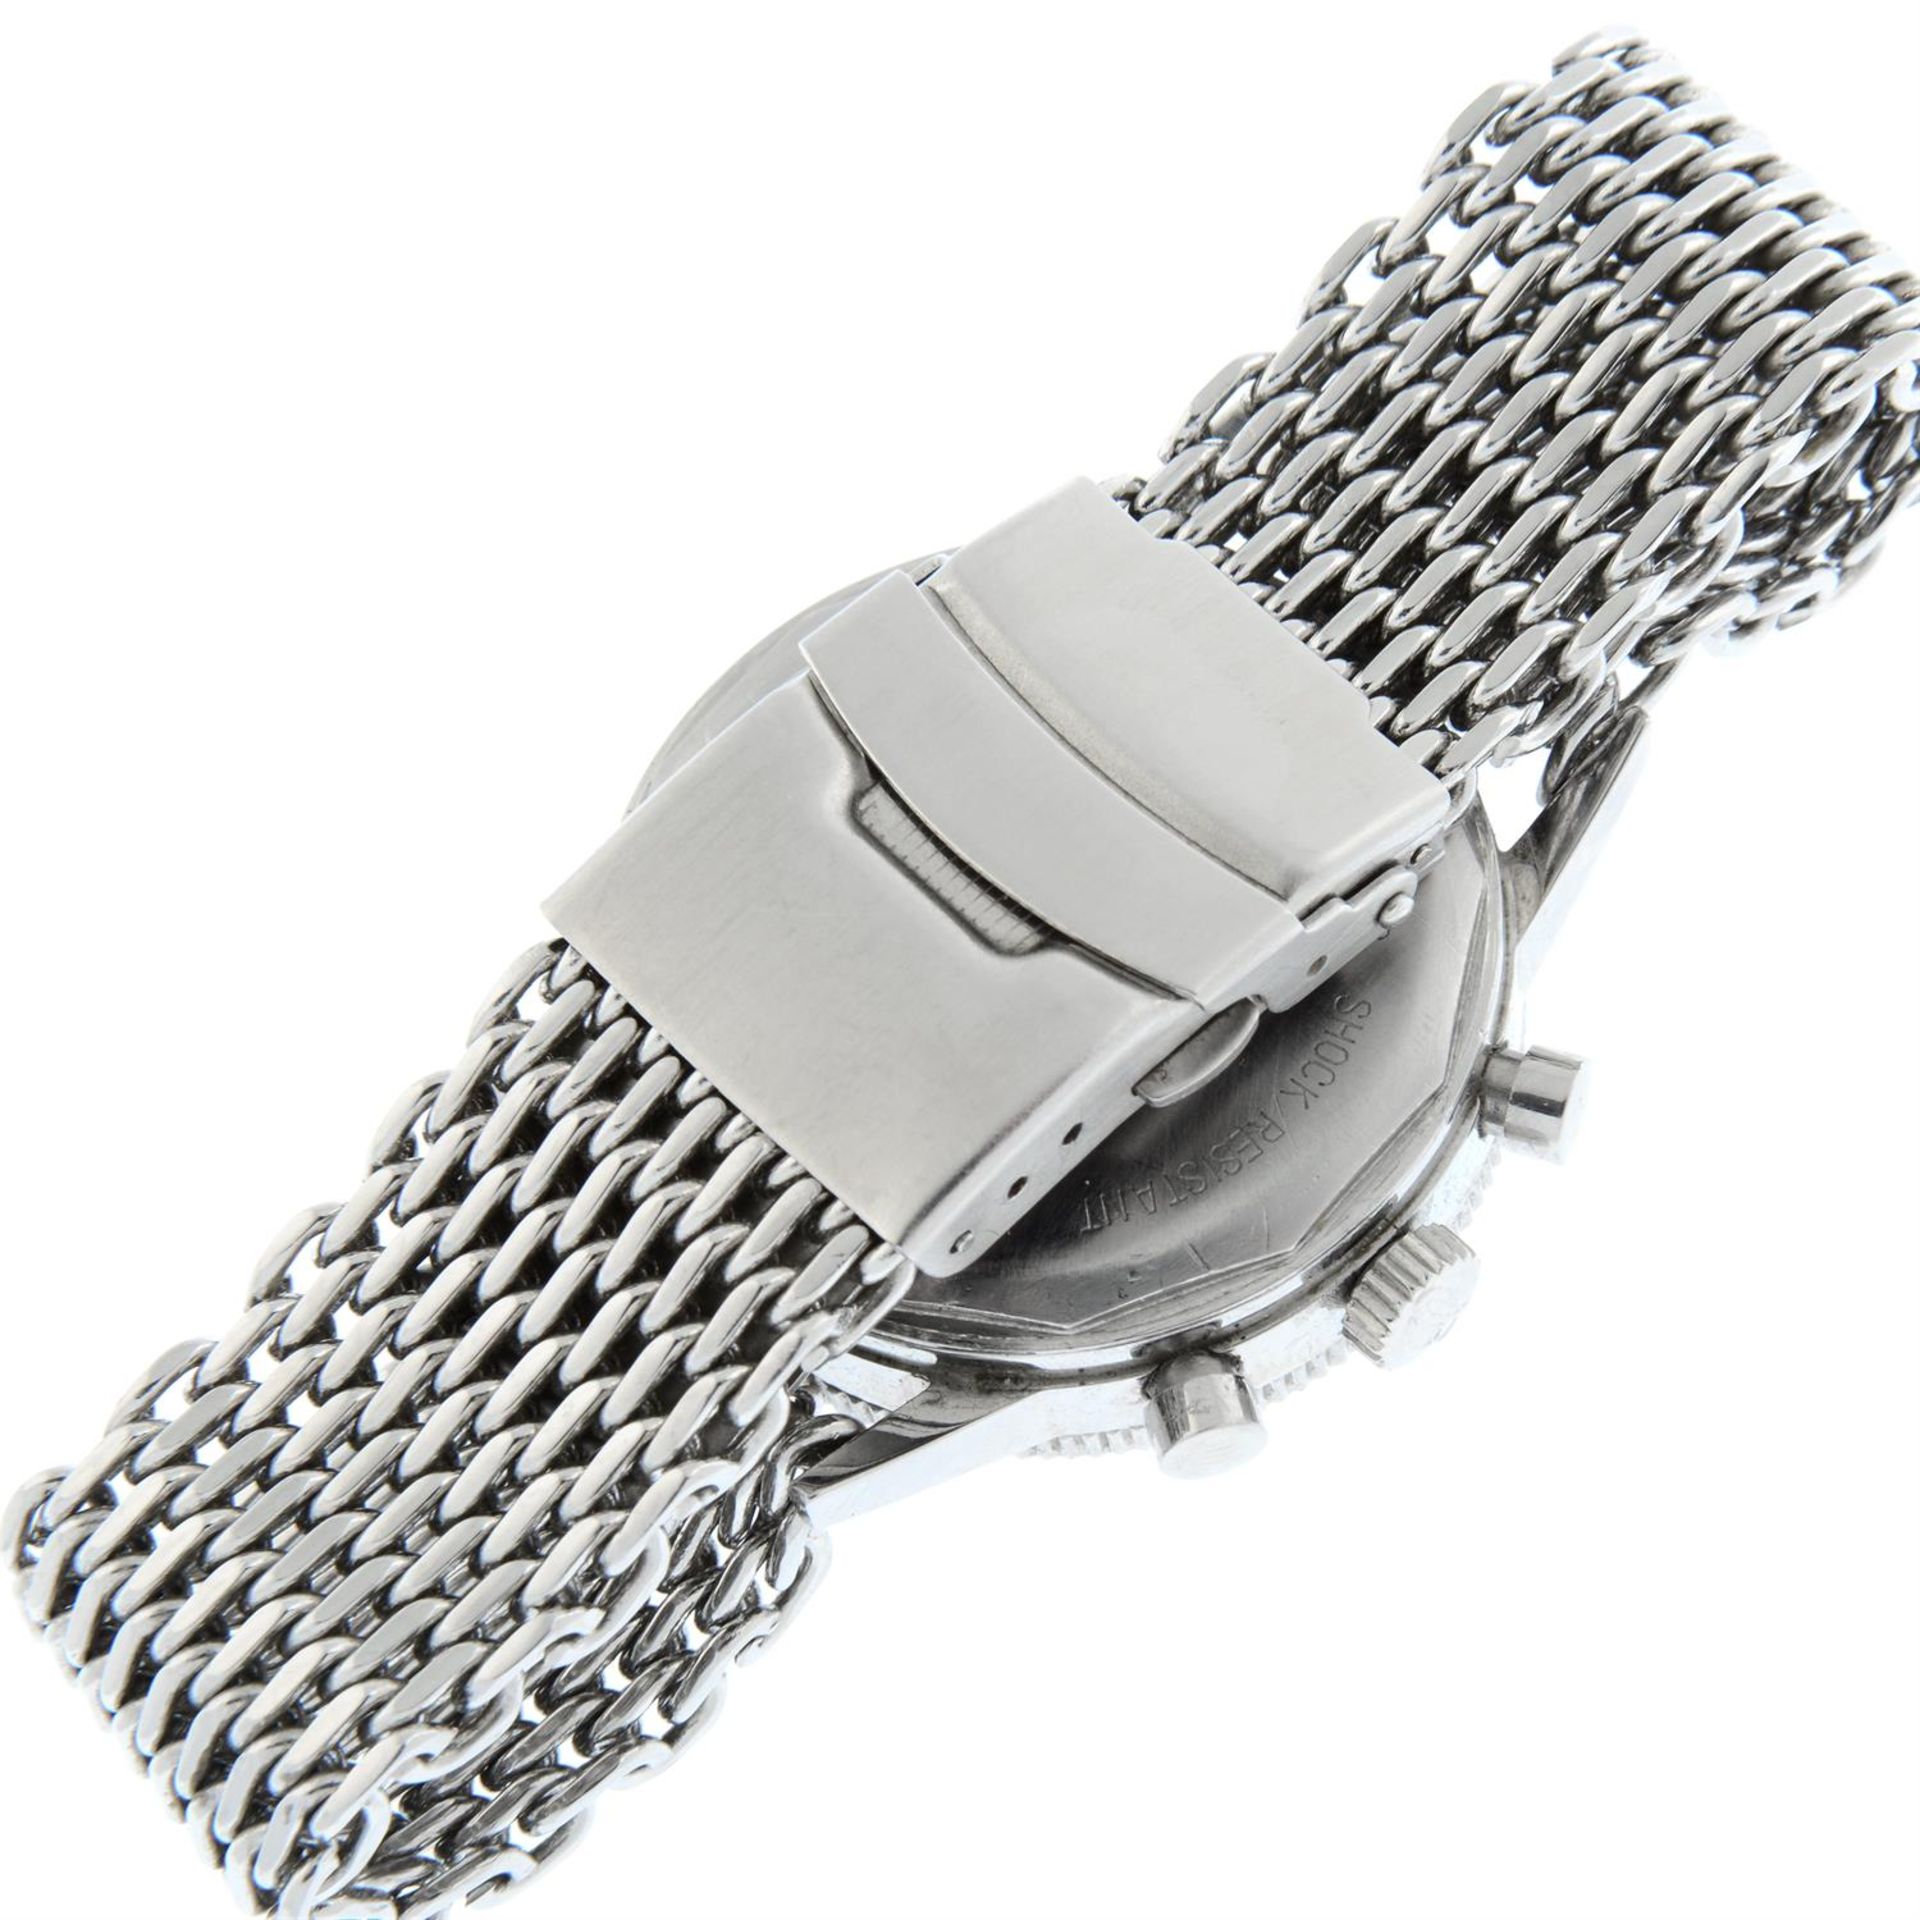 BREITLING - a stainless steel Sprint chronograph bracelet watch, 38mm. - Image 2 of 5